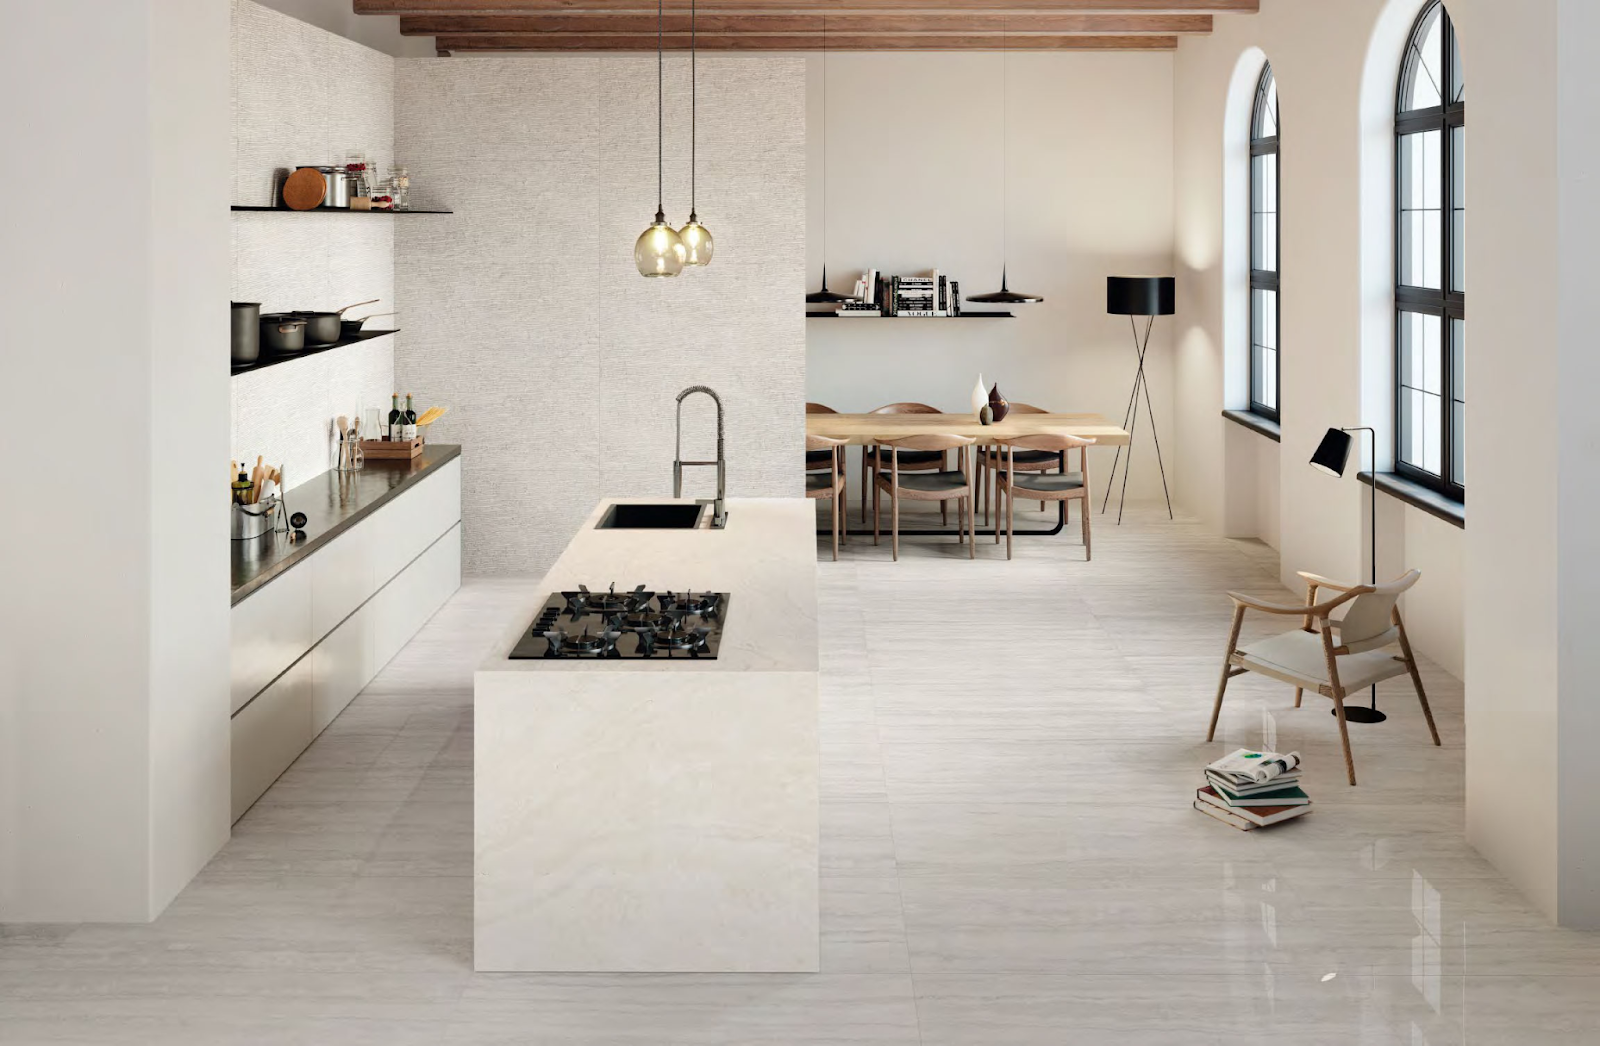 Is Travertine The New Marble?